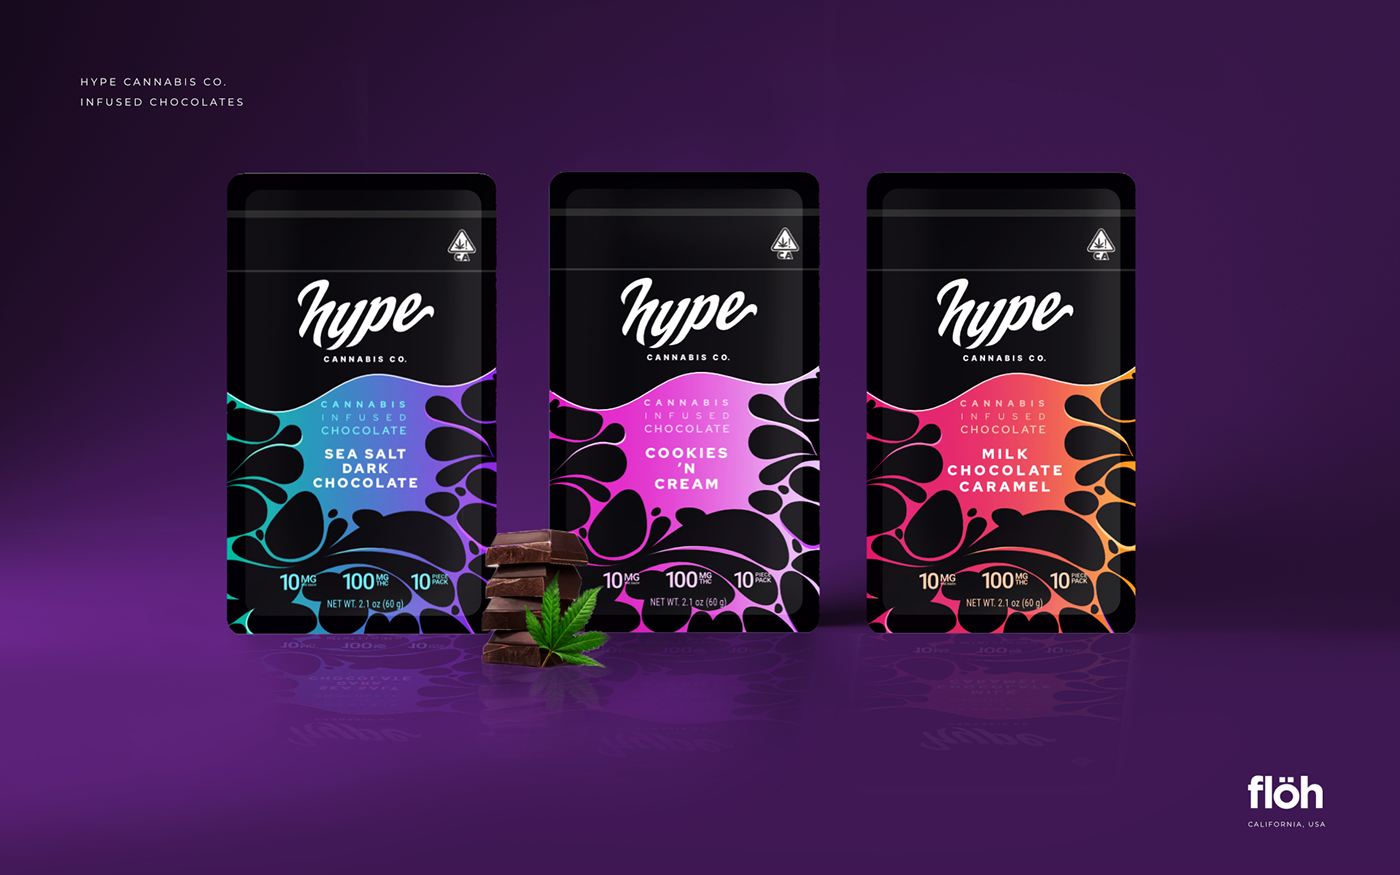 PACKAGE DESIGN & ILLUSTRATION HYPE CANNABIS CO. CHOCOLATE by flohcreative.com